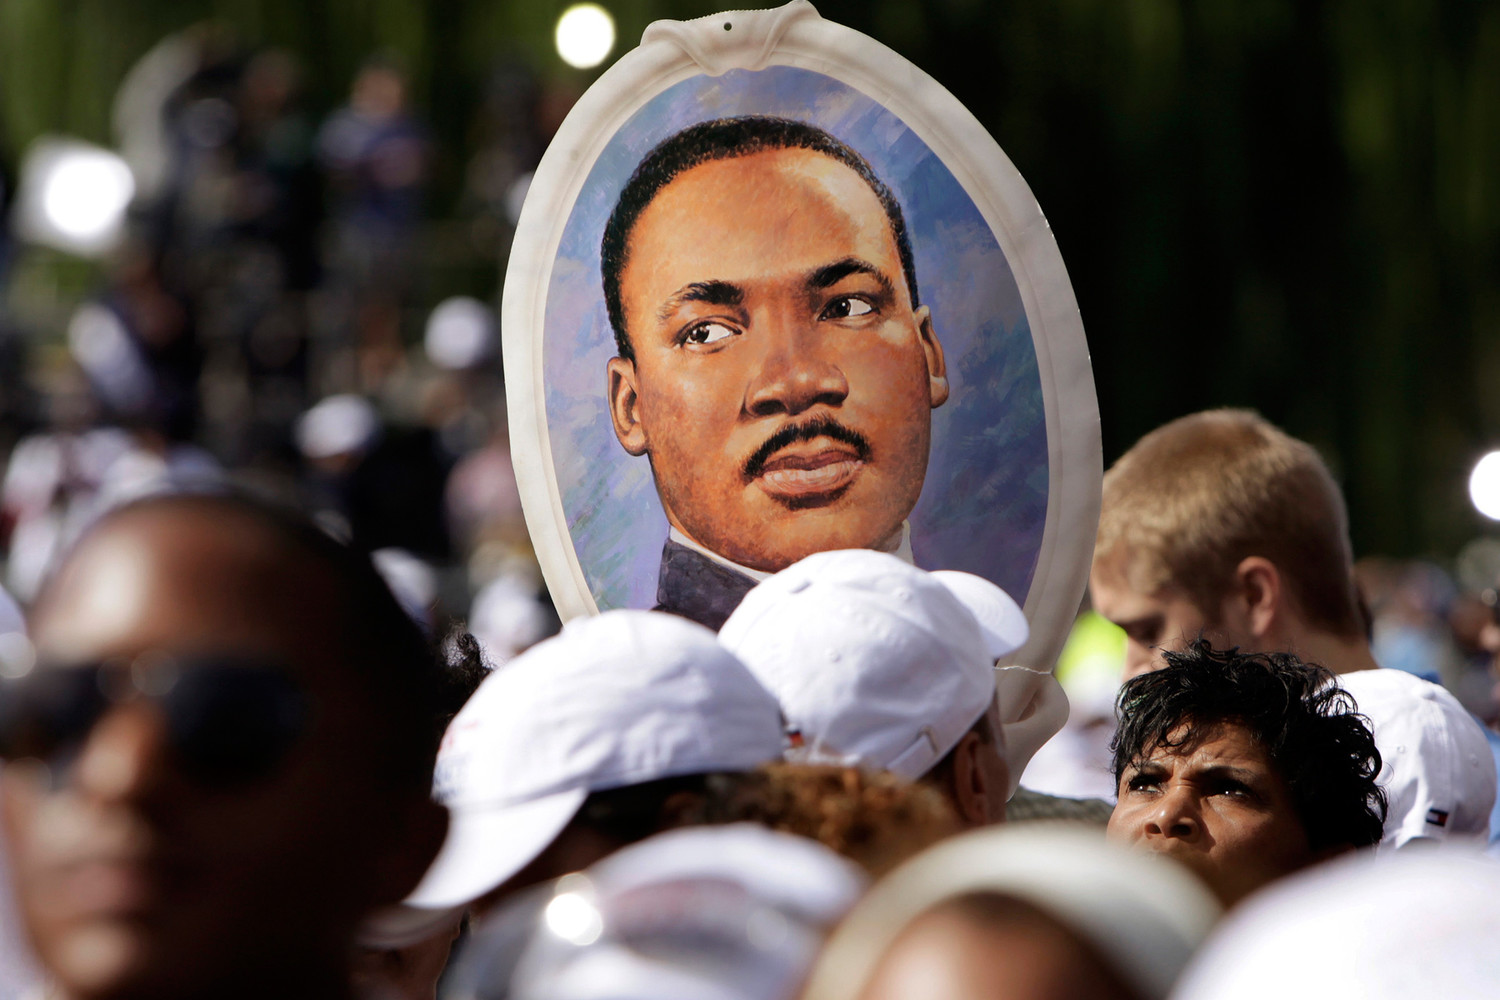 A woman holds a portrait of the Rev. Dr. Martin Luther King Jr. during the 2011 dedication of the King memorial at the National Mall in Washington. Fifty years after the assassination of the civil rights leader, “we need to ask ourselves if we are doing all we can to build the culture of love, respect and peace to which the Gospel calls us,” the U.S. Catholic bishops’ Administrative Committee said March 28.